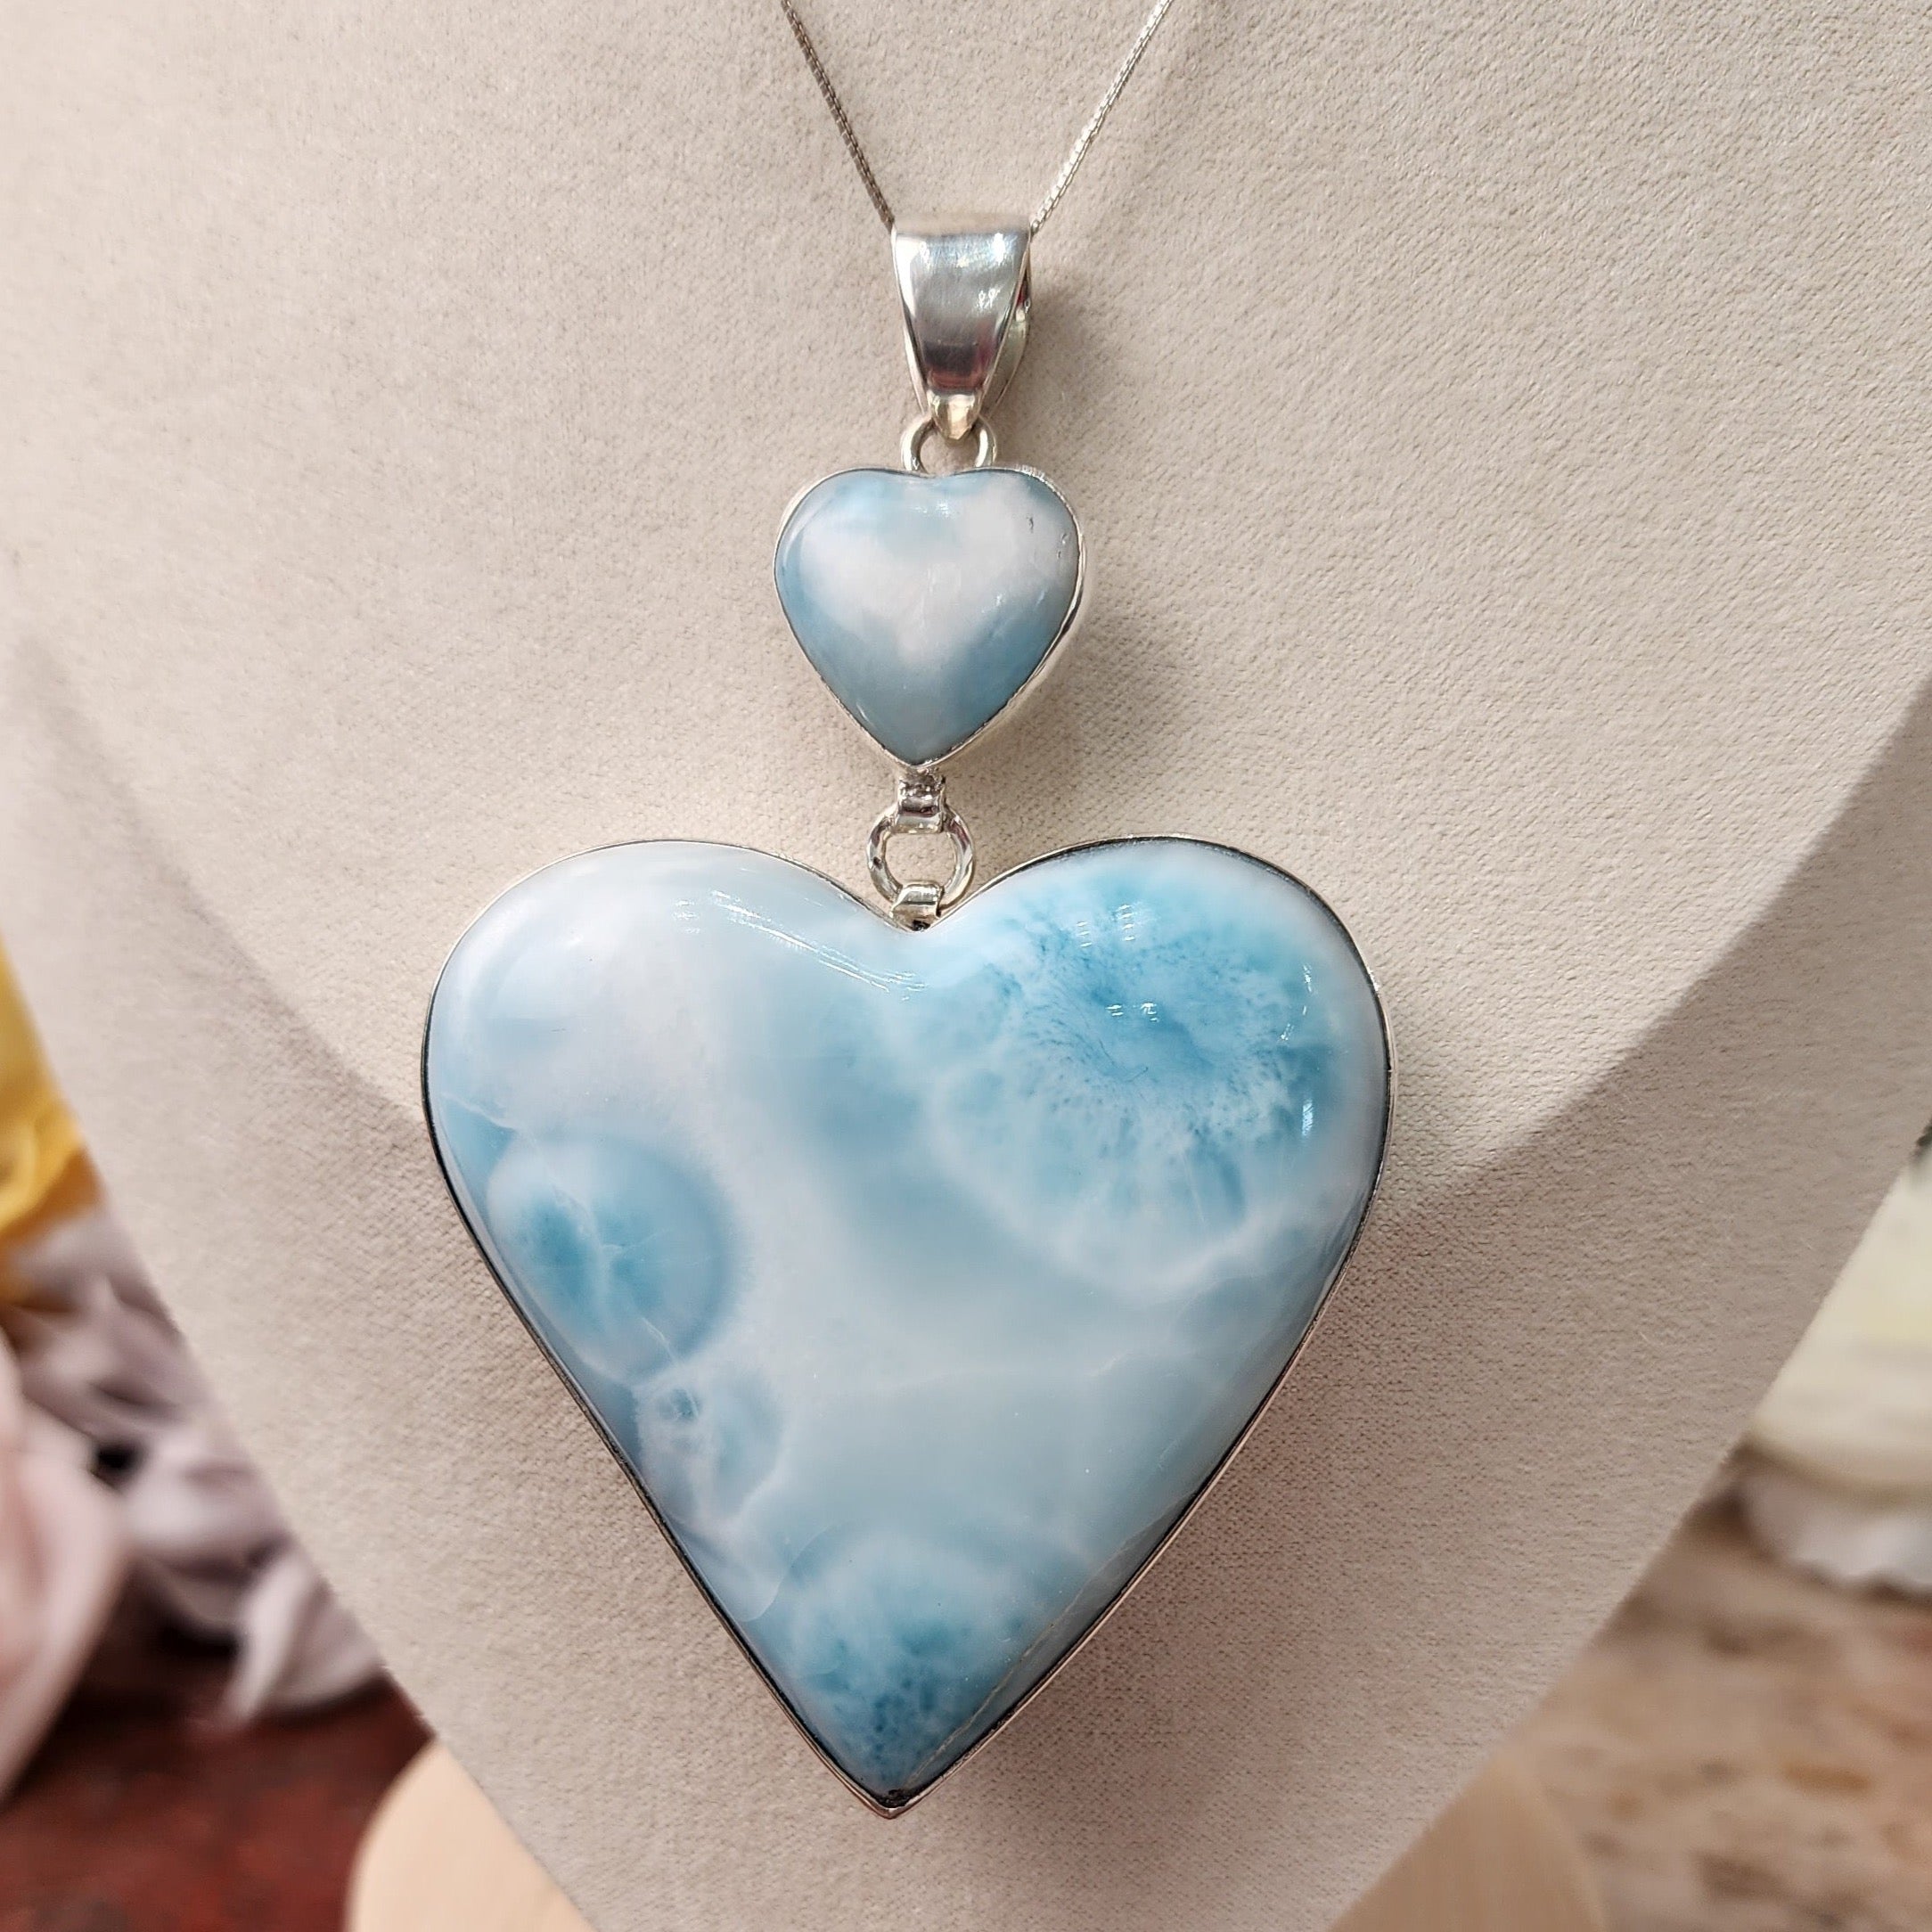 Larimar Heart Statement Necklace .925 Silver for Peace and Tranquility